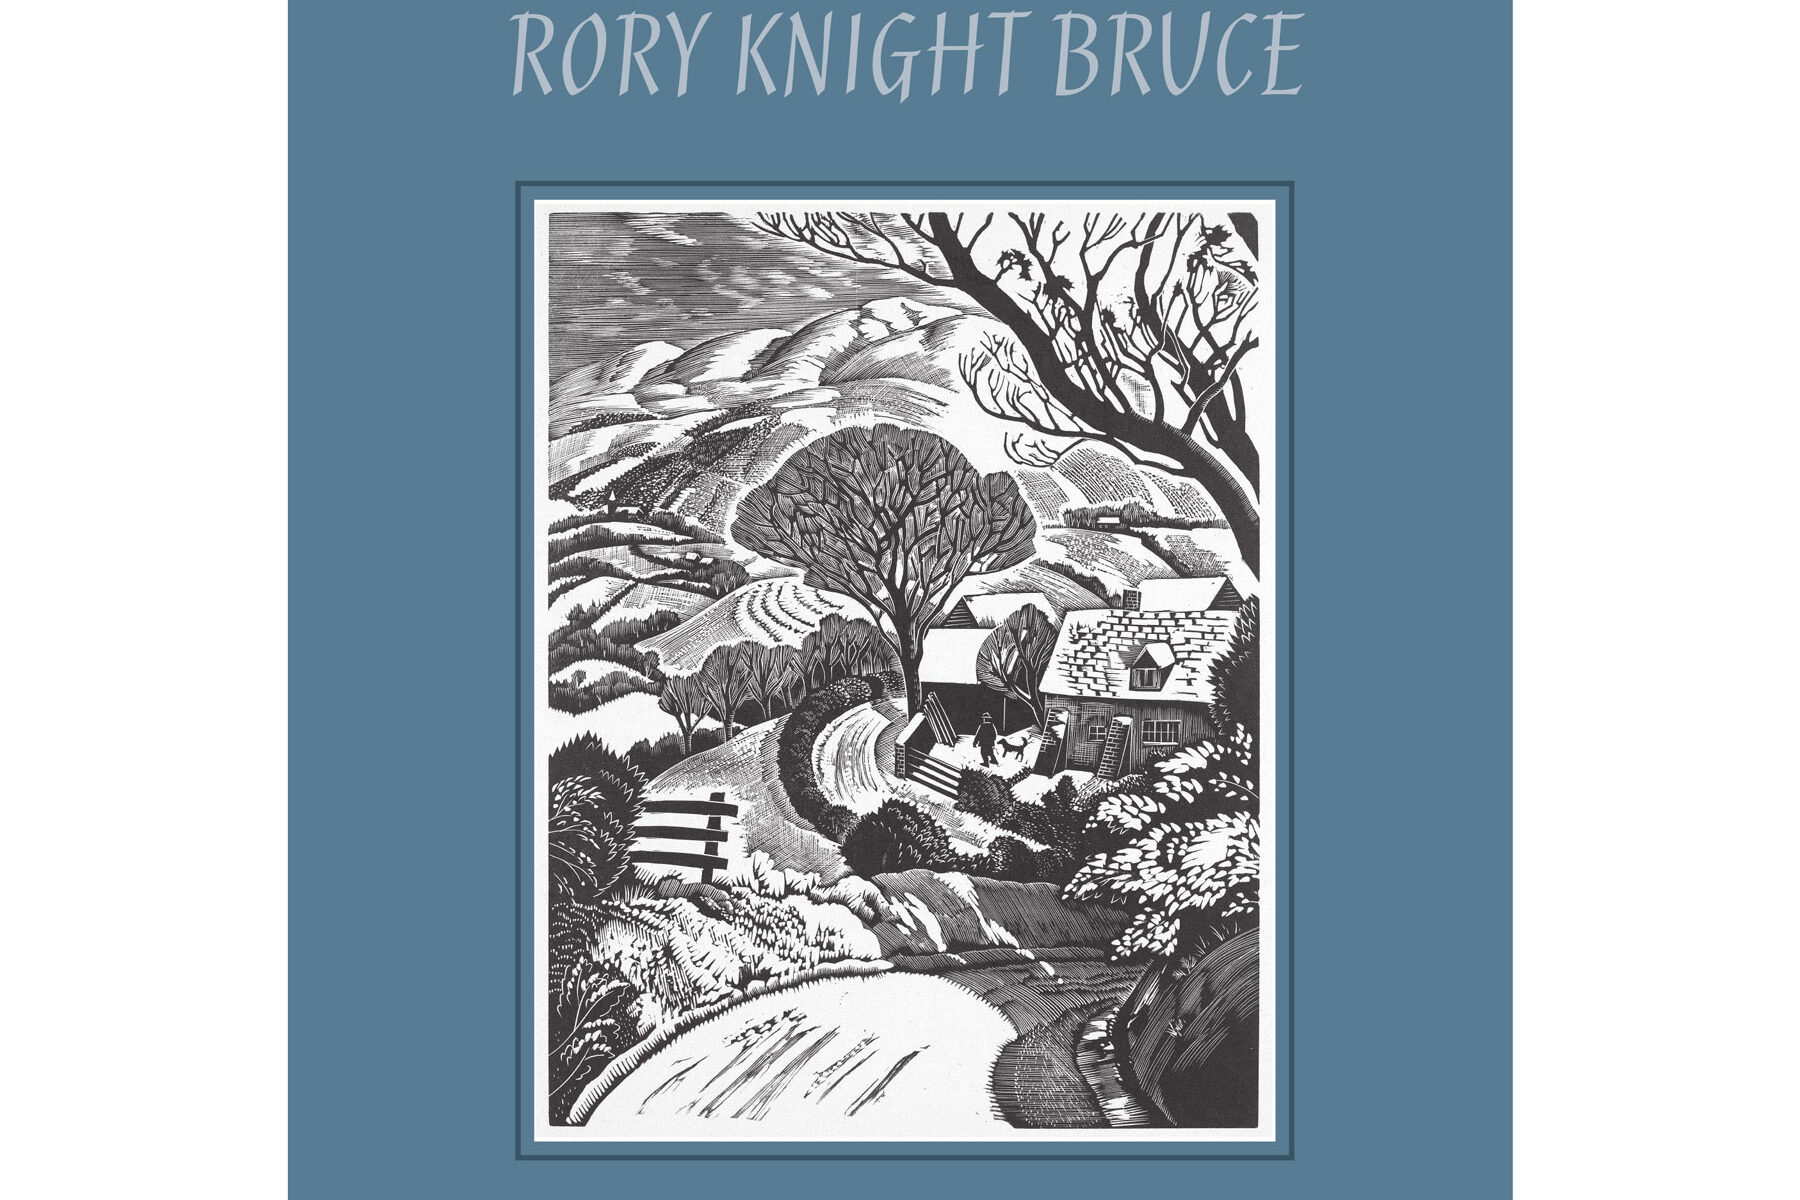 An Unanchored Heart by Rory Knight Bruce